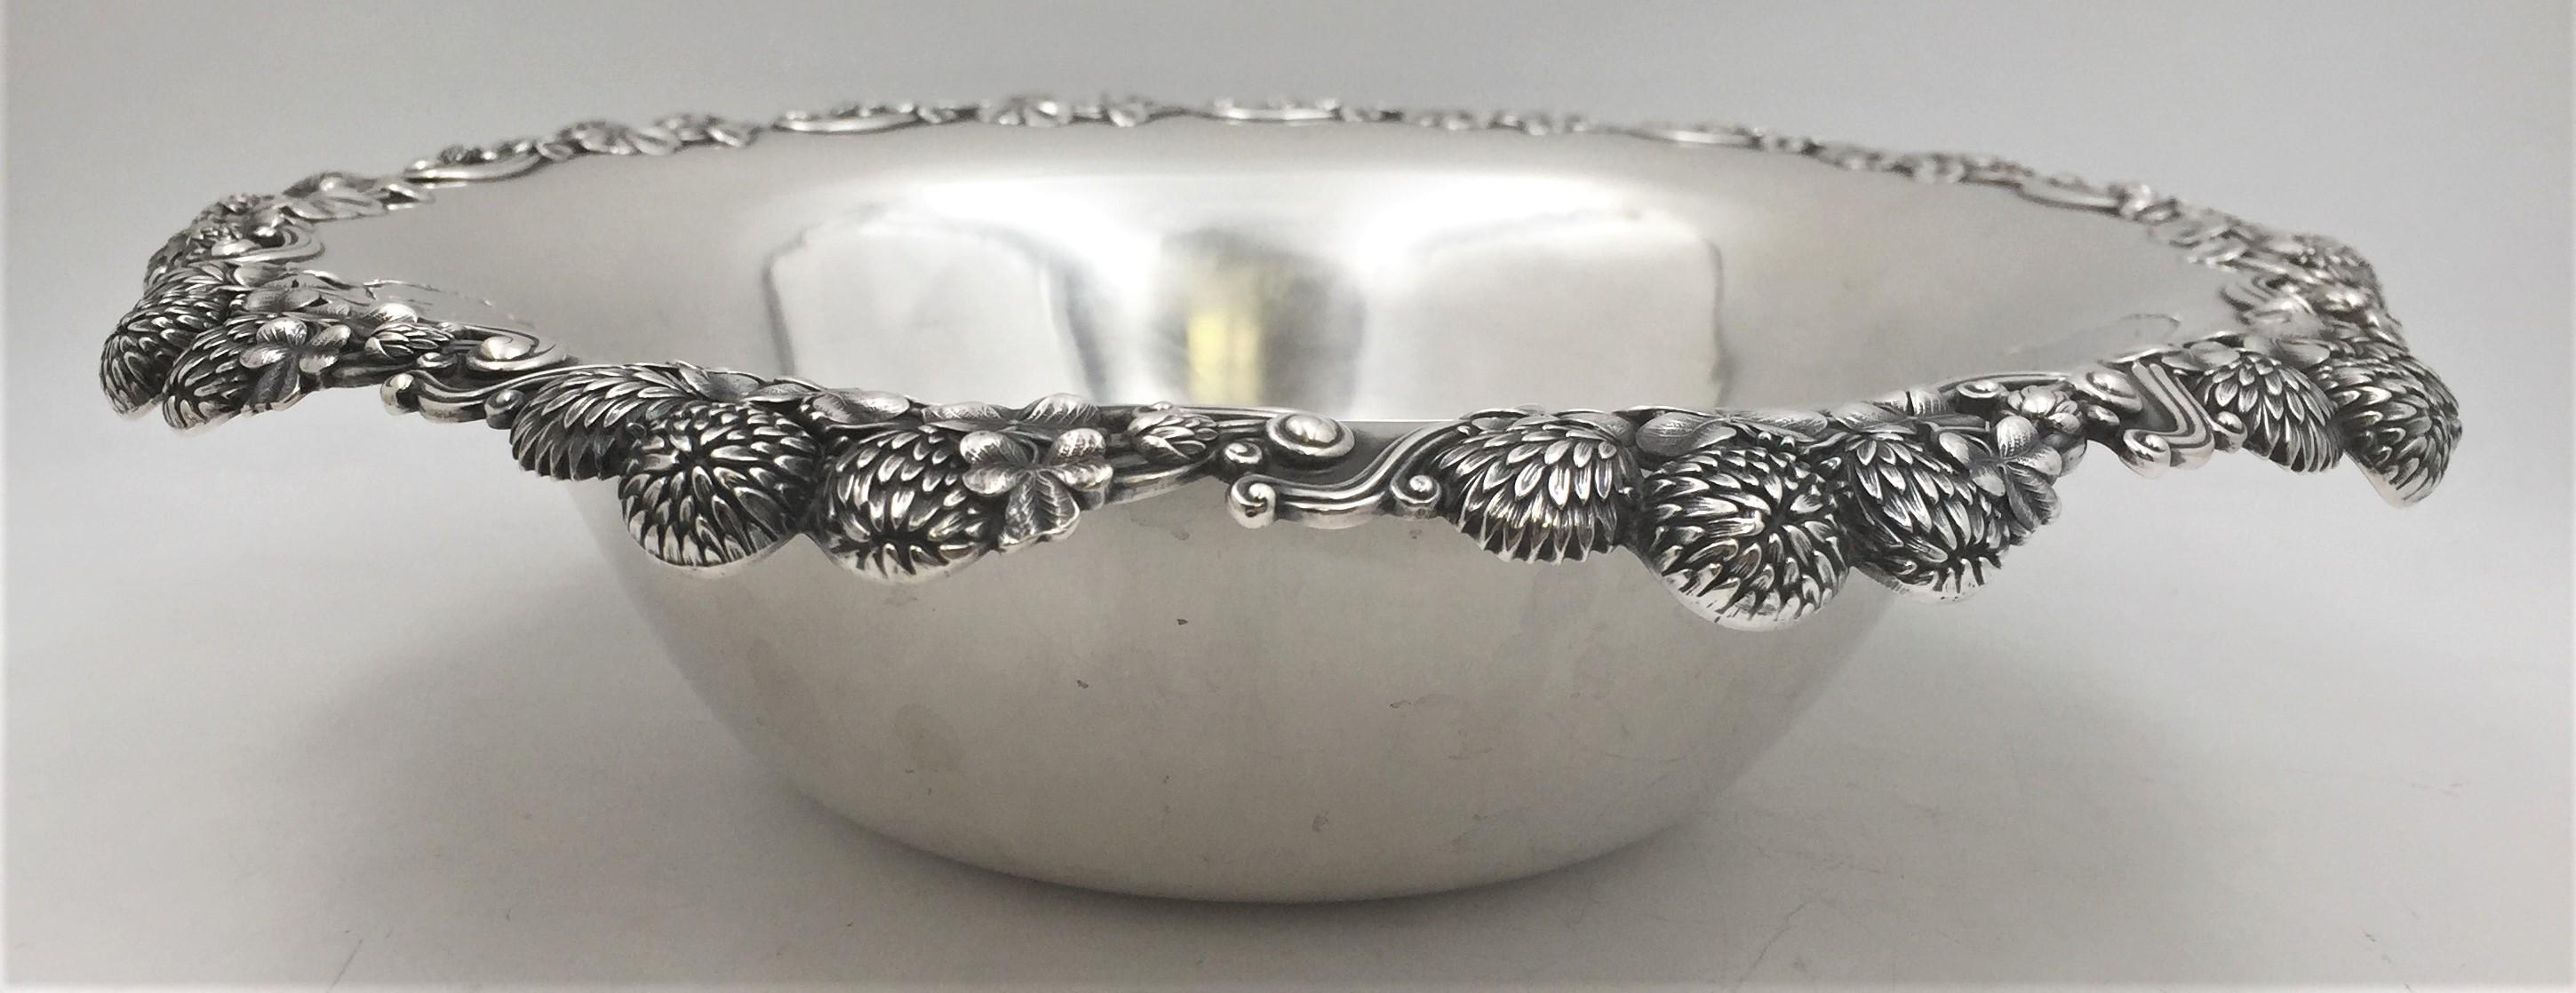 Tiffany & Co. sterling silver berry bowl in Art Nouveau style and in Clover pattern in pattern 13780 from 1898 with exquisite raised motifs of flowers, leaves, and twirls around the rim. It measures 14 1/4'' in diameter by 3 2/3'' in height, weighs